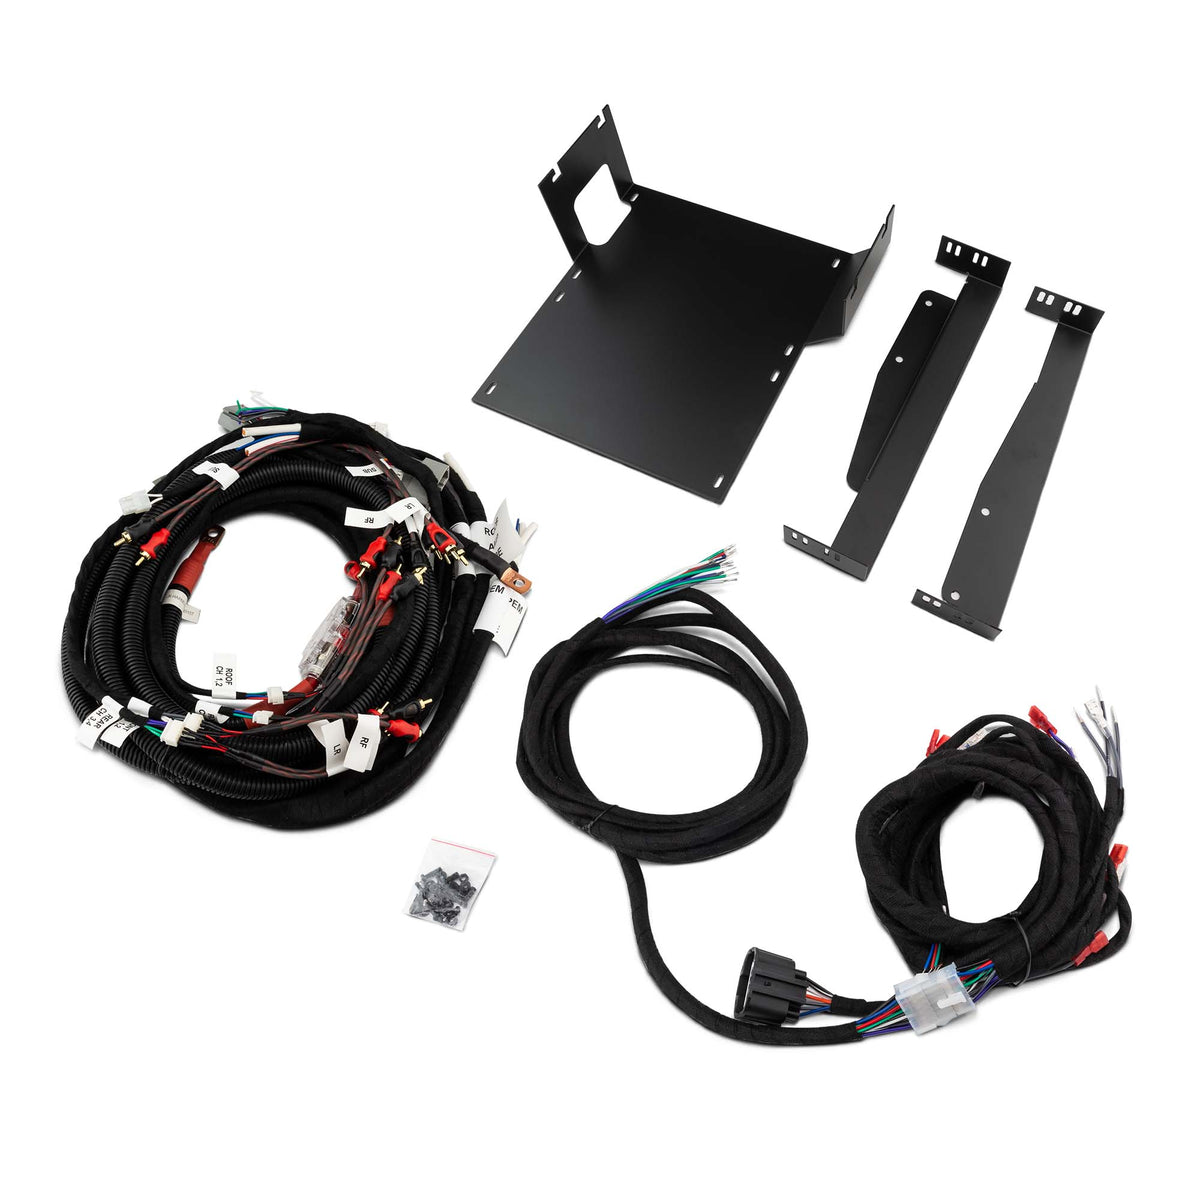 Jeep JK Plug and Play Harness for JK-SBAR Overhead Bar System, Amplifier and SQBASS Underseat Subwoofer